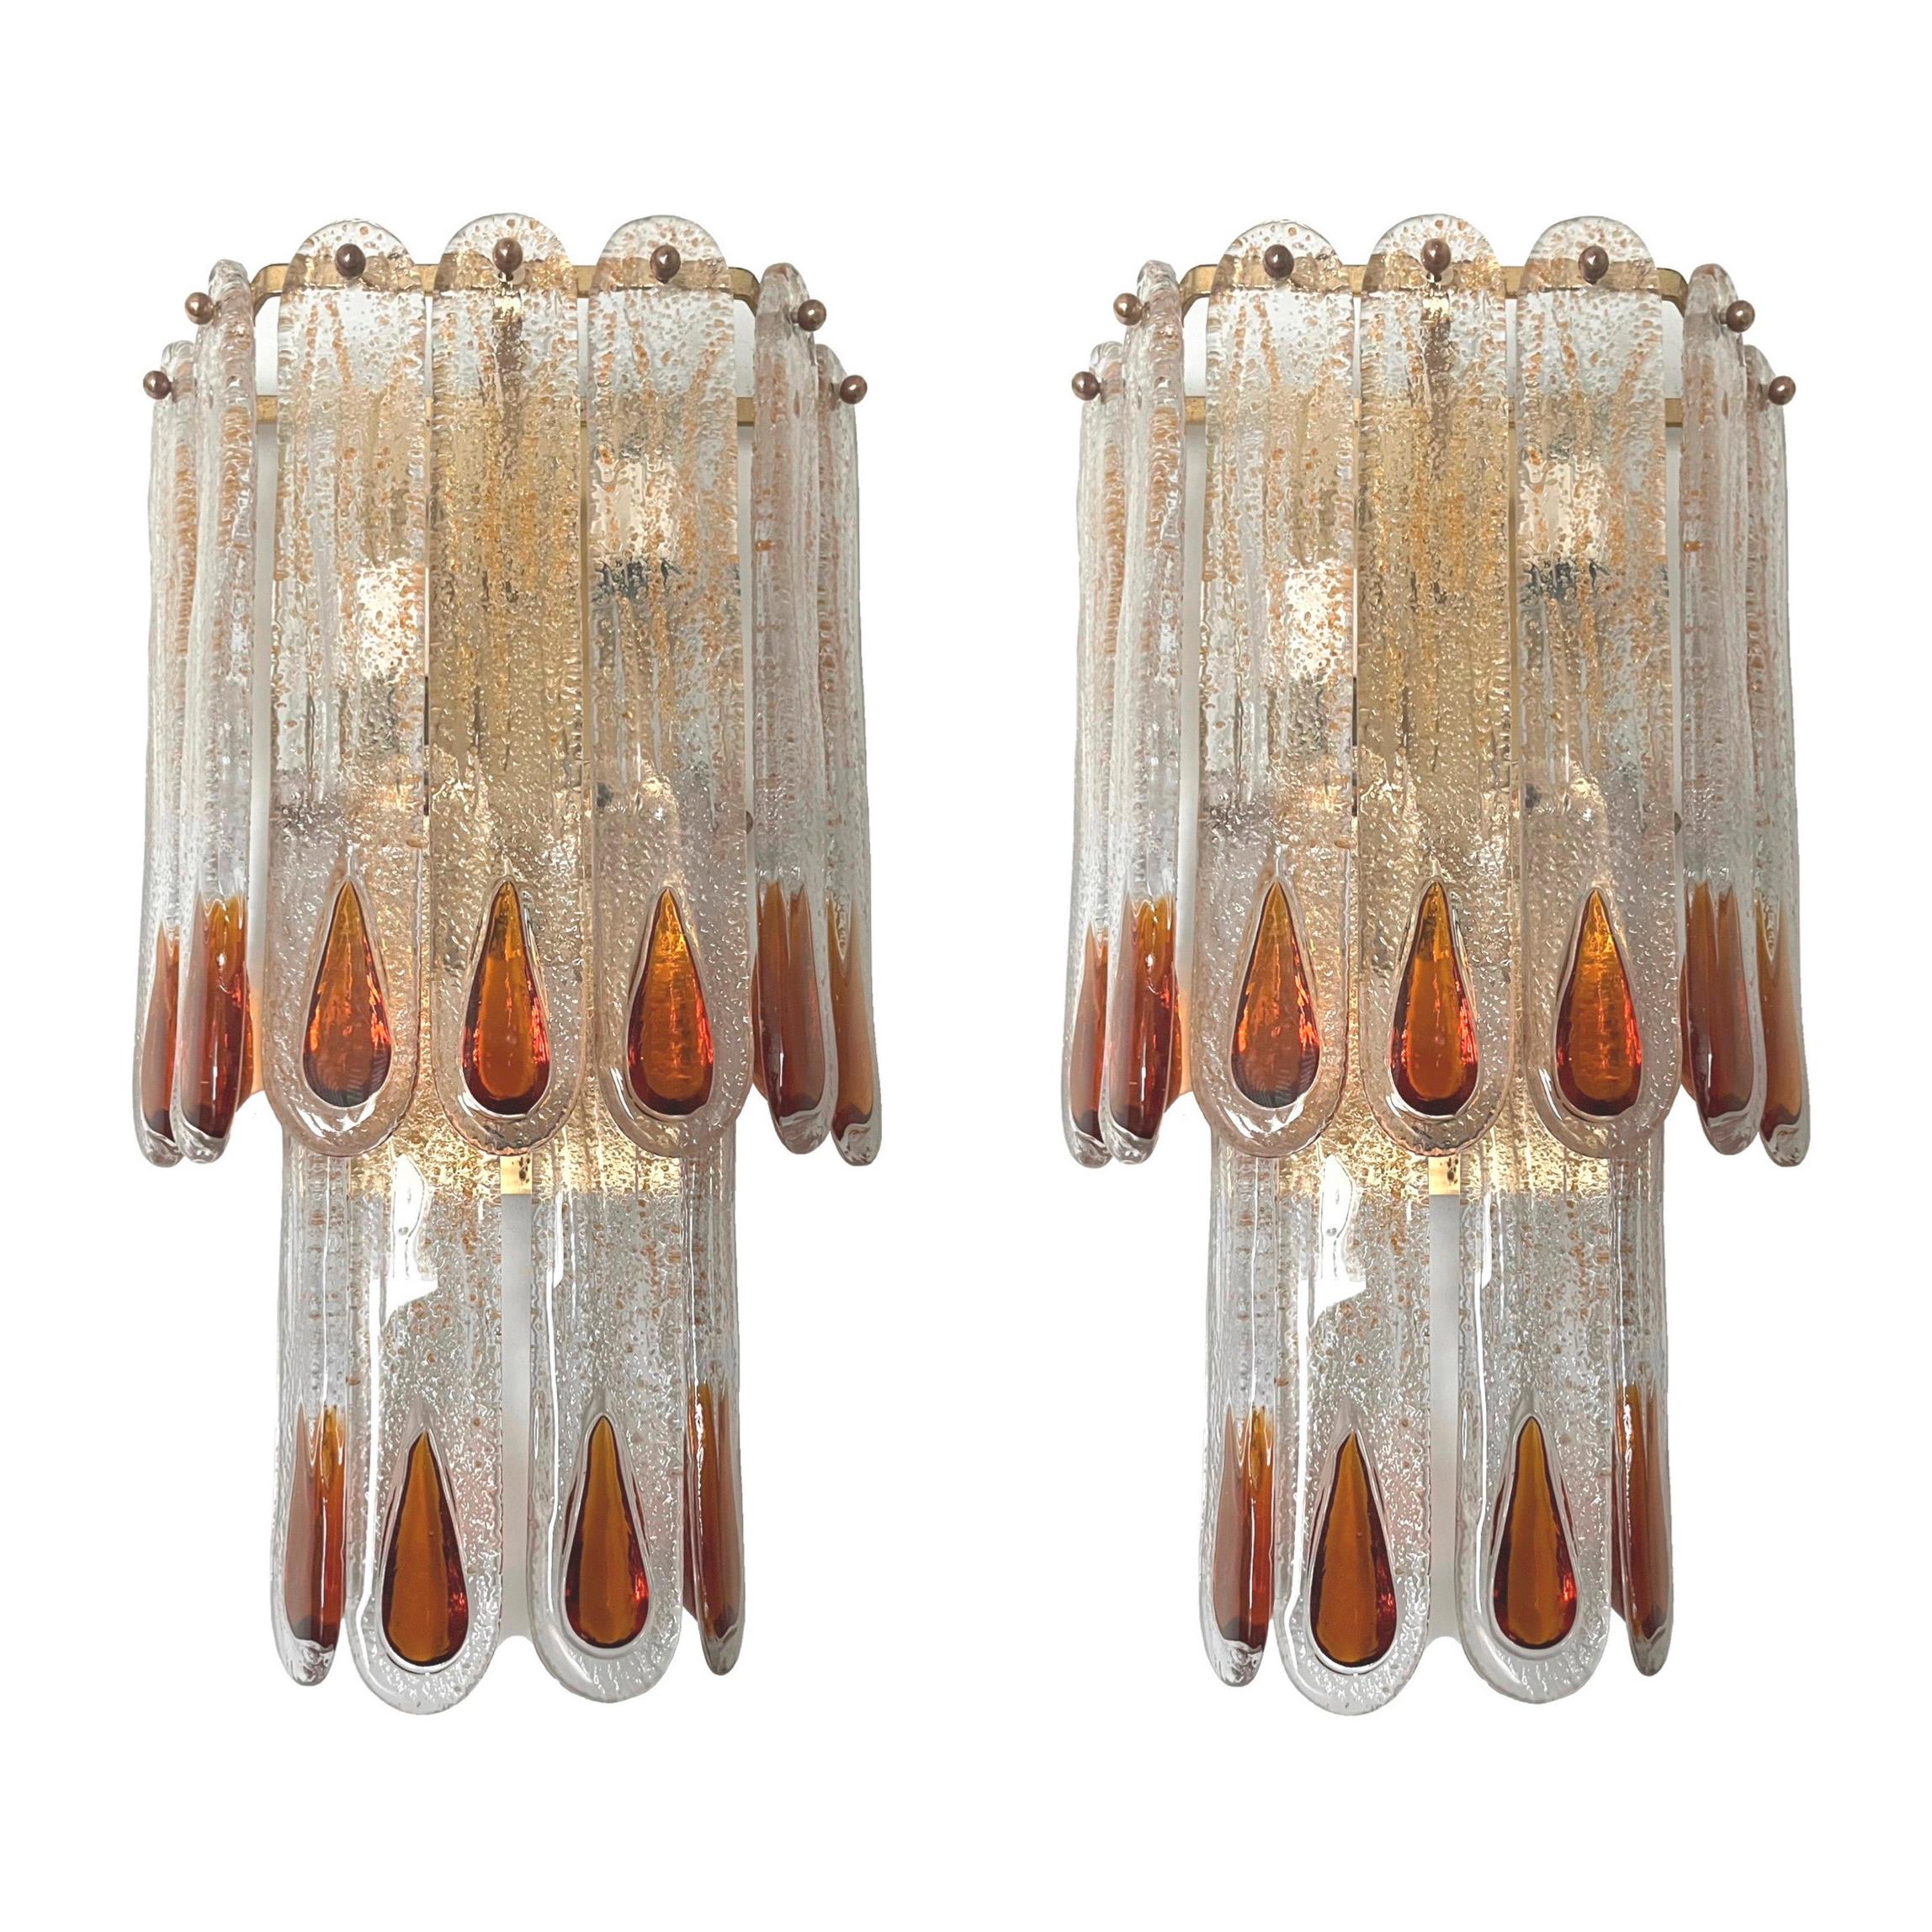 Stunning and beautiful Pair of Italian amber Murano glass wall sconces from 1970s.
These sconces were made during the 1970s in Italy for the Venice Company “Mazzega”.
Each wall sconce is composed by 11 units of Murano glasses (H 11.81 in. 30 cm x